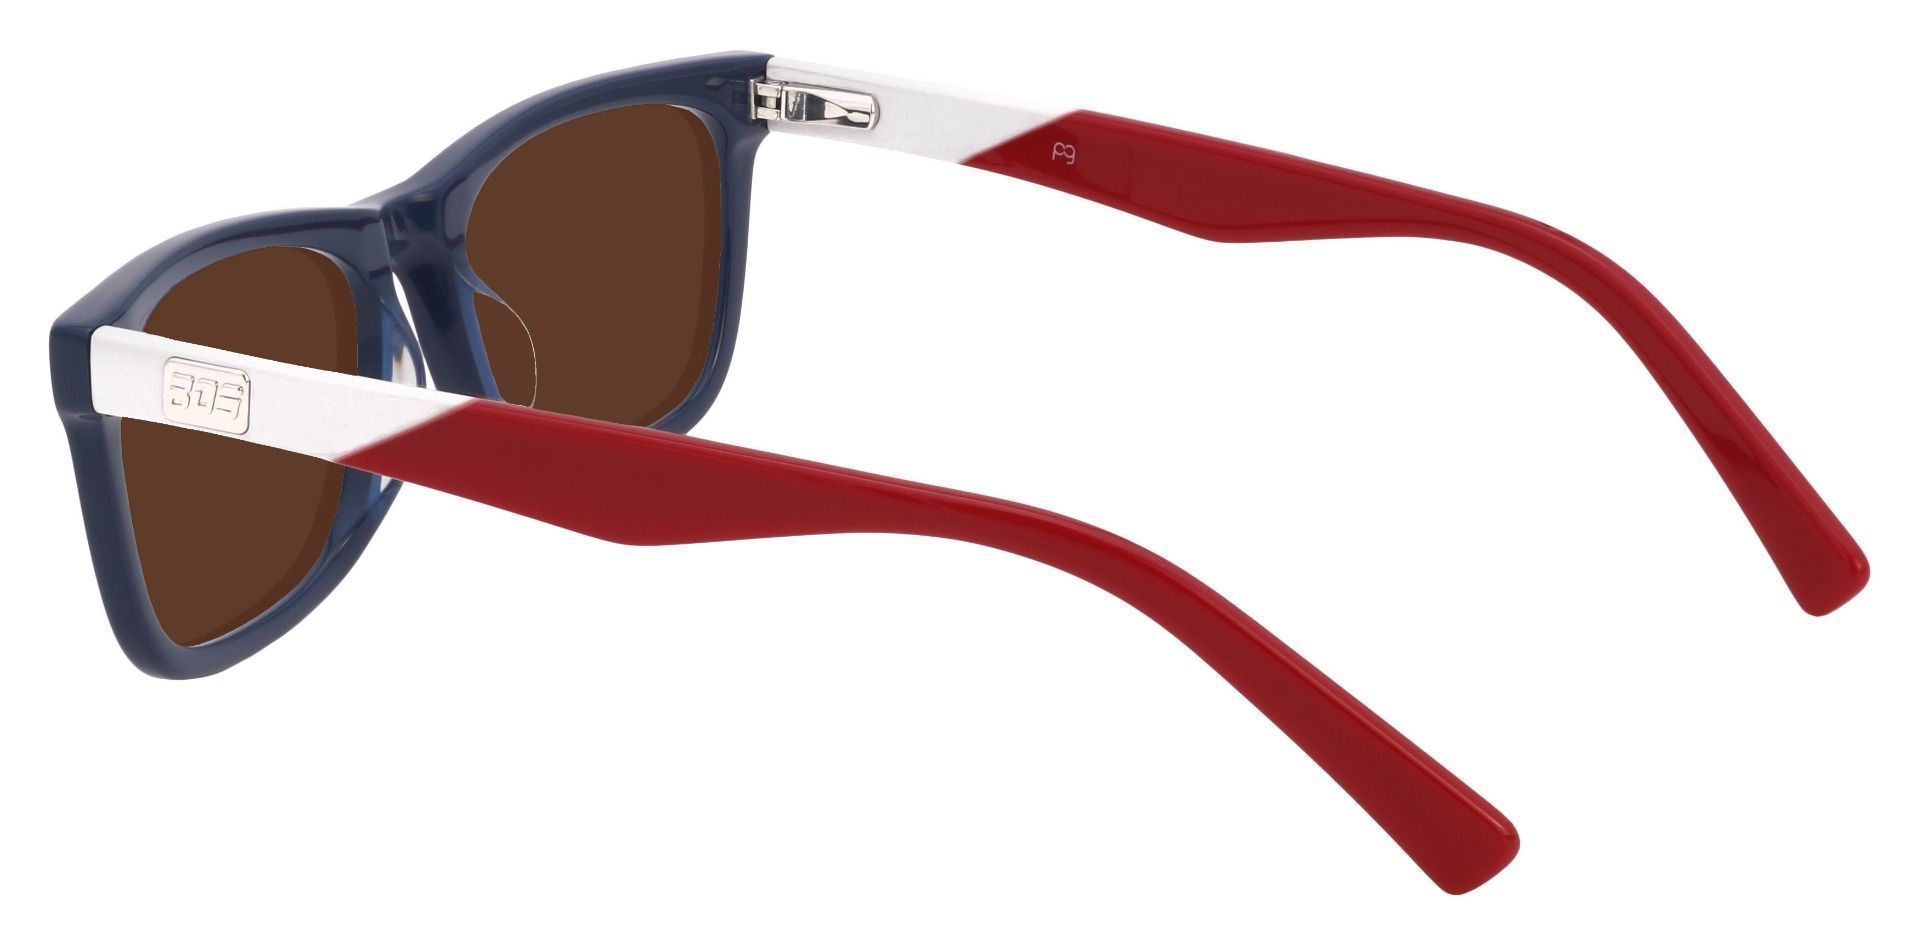 Quincy Rectangle Non-Rx Sunglasses - Blue Frame With Brown Lenses